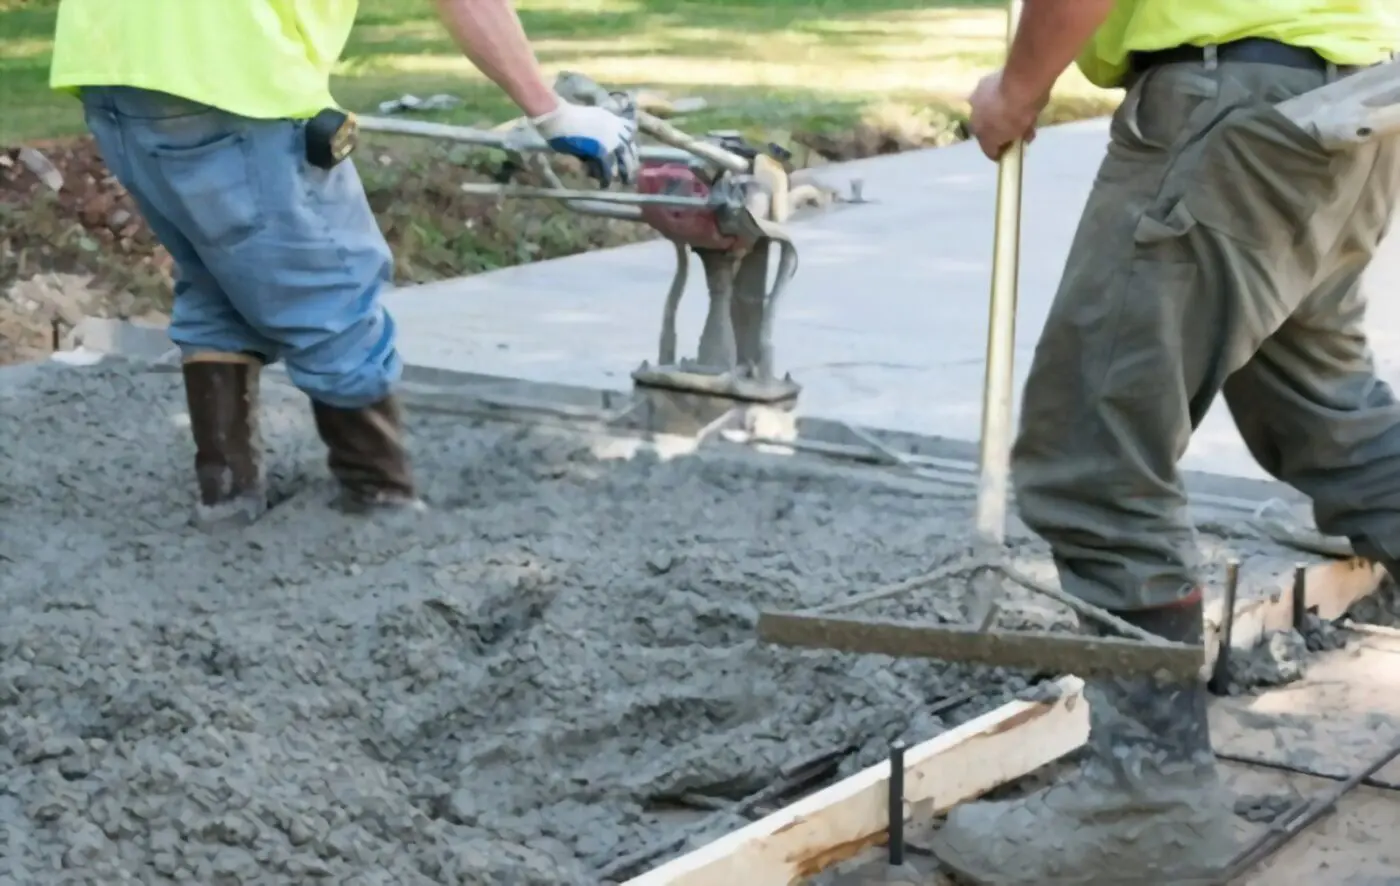 Two construction workers in protective gear, including gloves and boots, are working with tools to smooth and level wet concrete on a sidewalk. The scene is outdoors, with visible grass and trees in the background, as part of a larger Lauderdale Concrete project in Miramar FL.